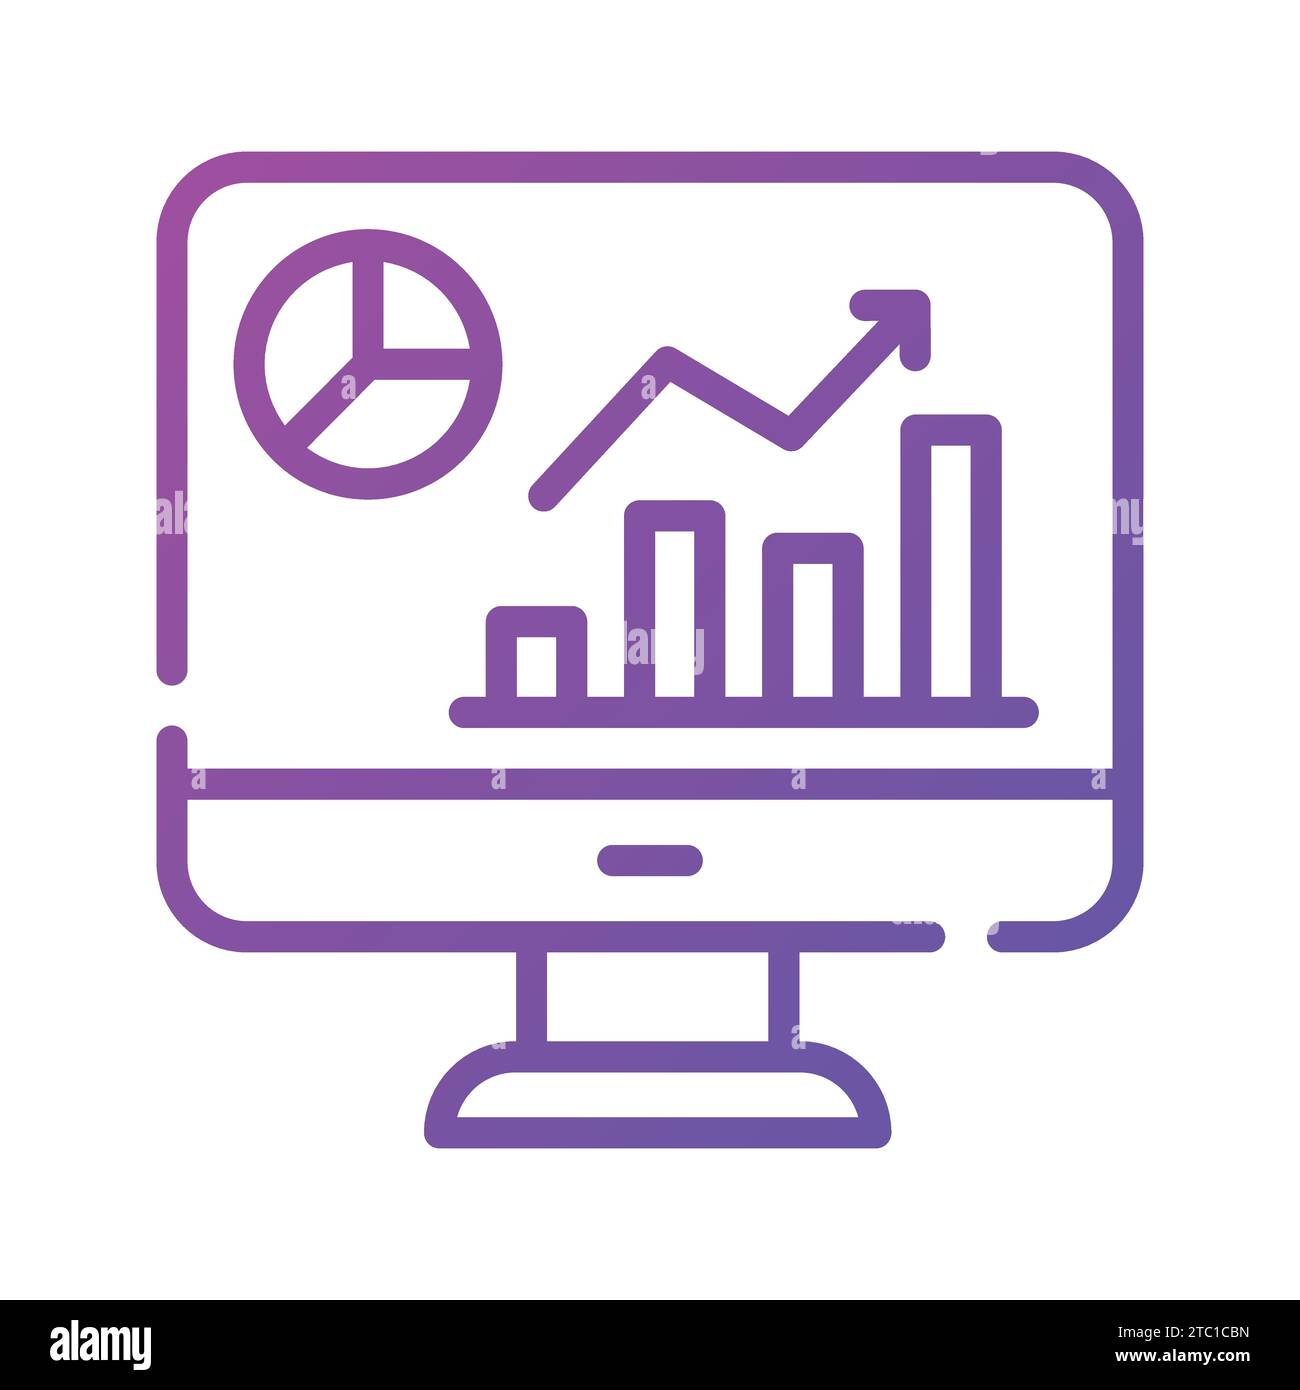 Data chart on lcd display showing vector of market analysis in modern style. Stock Vector